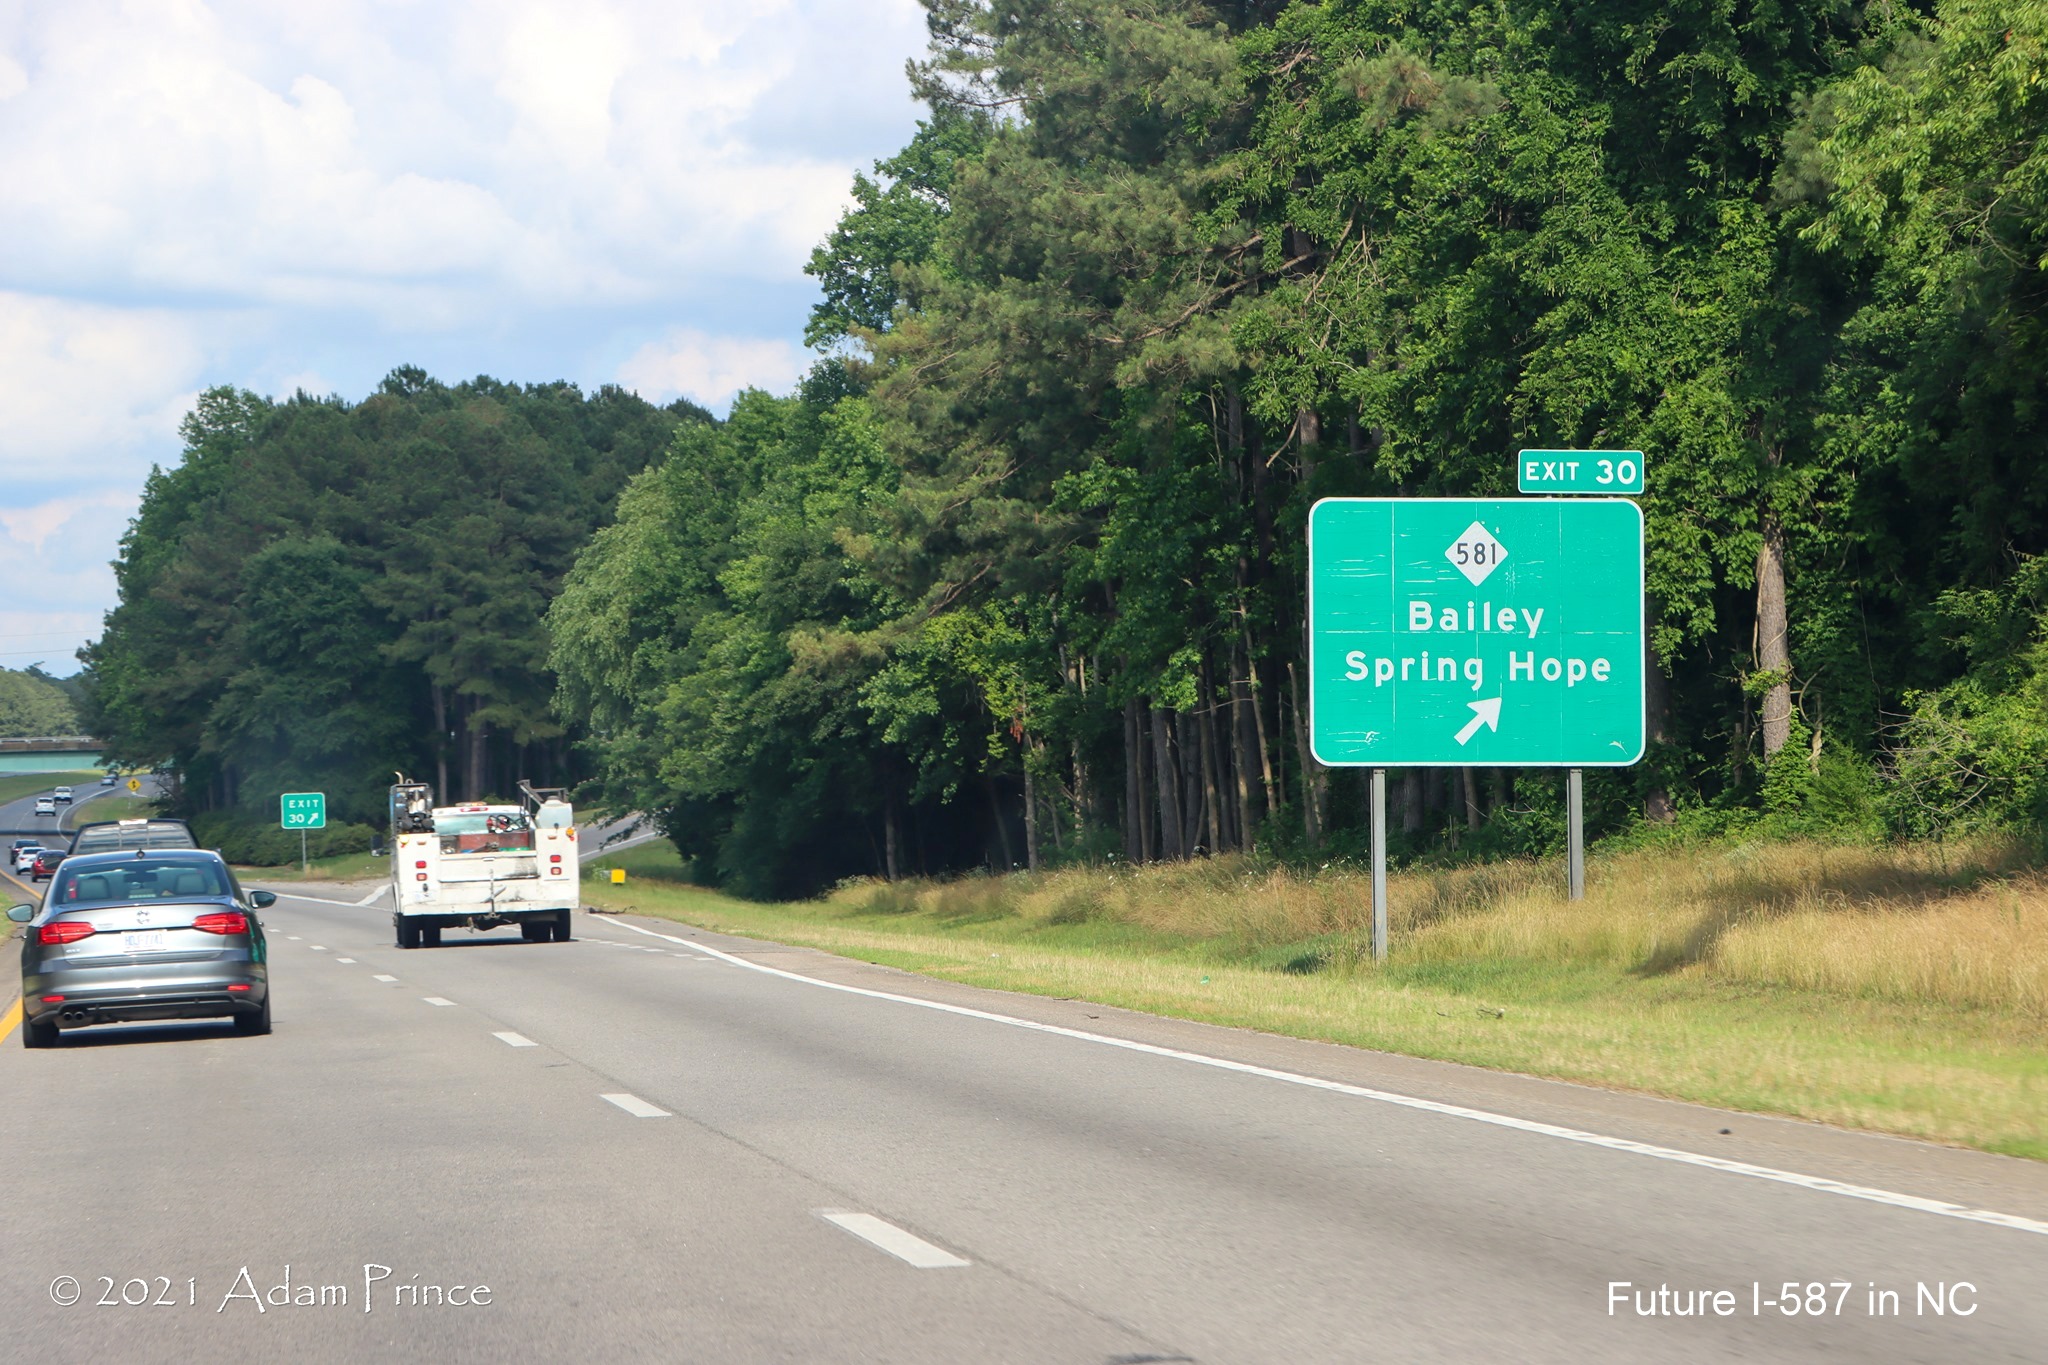 Ground mounted ramp sign for NC 58 exit on US 264 West (Future I-587 North) in Bailey, photo by Adam Prince, June 2021